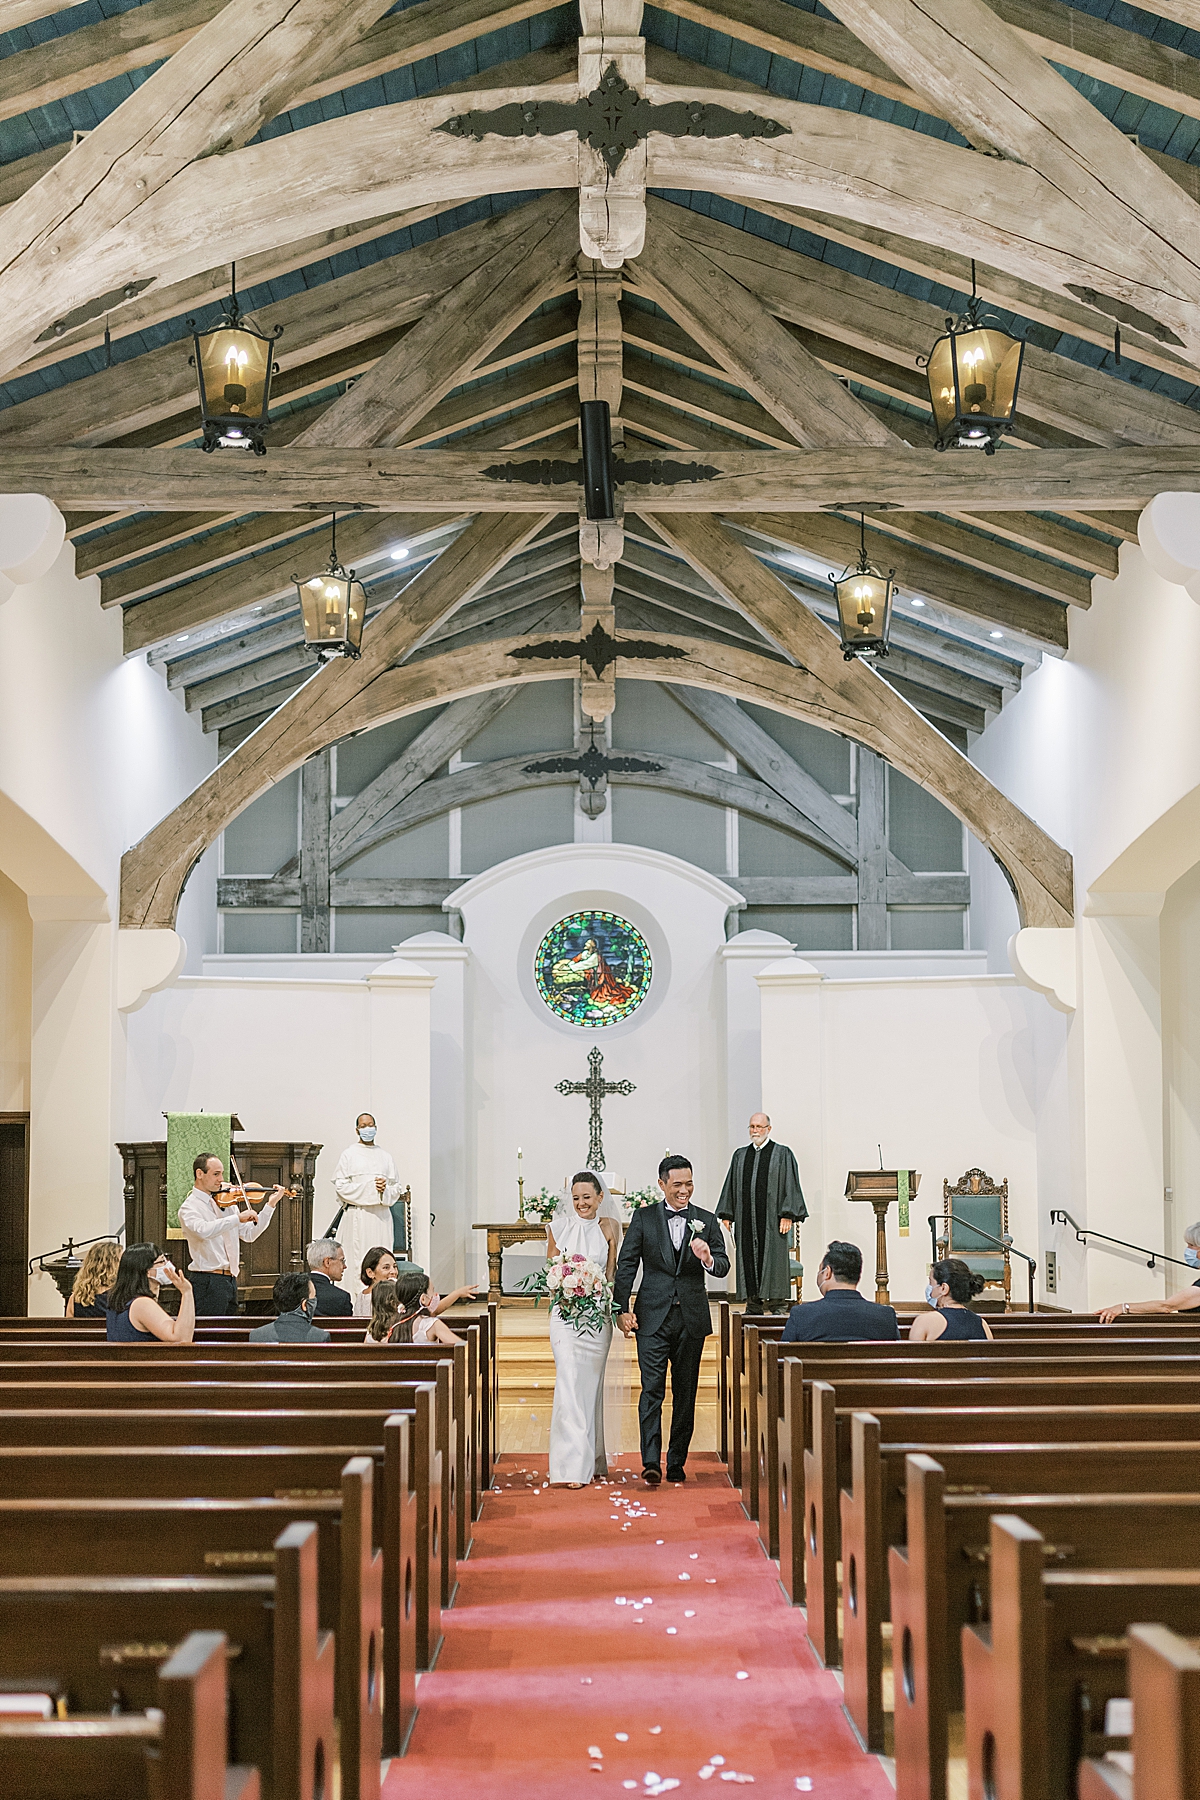 The couple walking down the aisle after being pronounced Mr. and Mrs. at their Montecito Church Wedding.